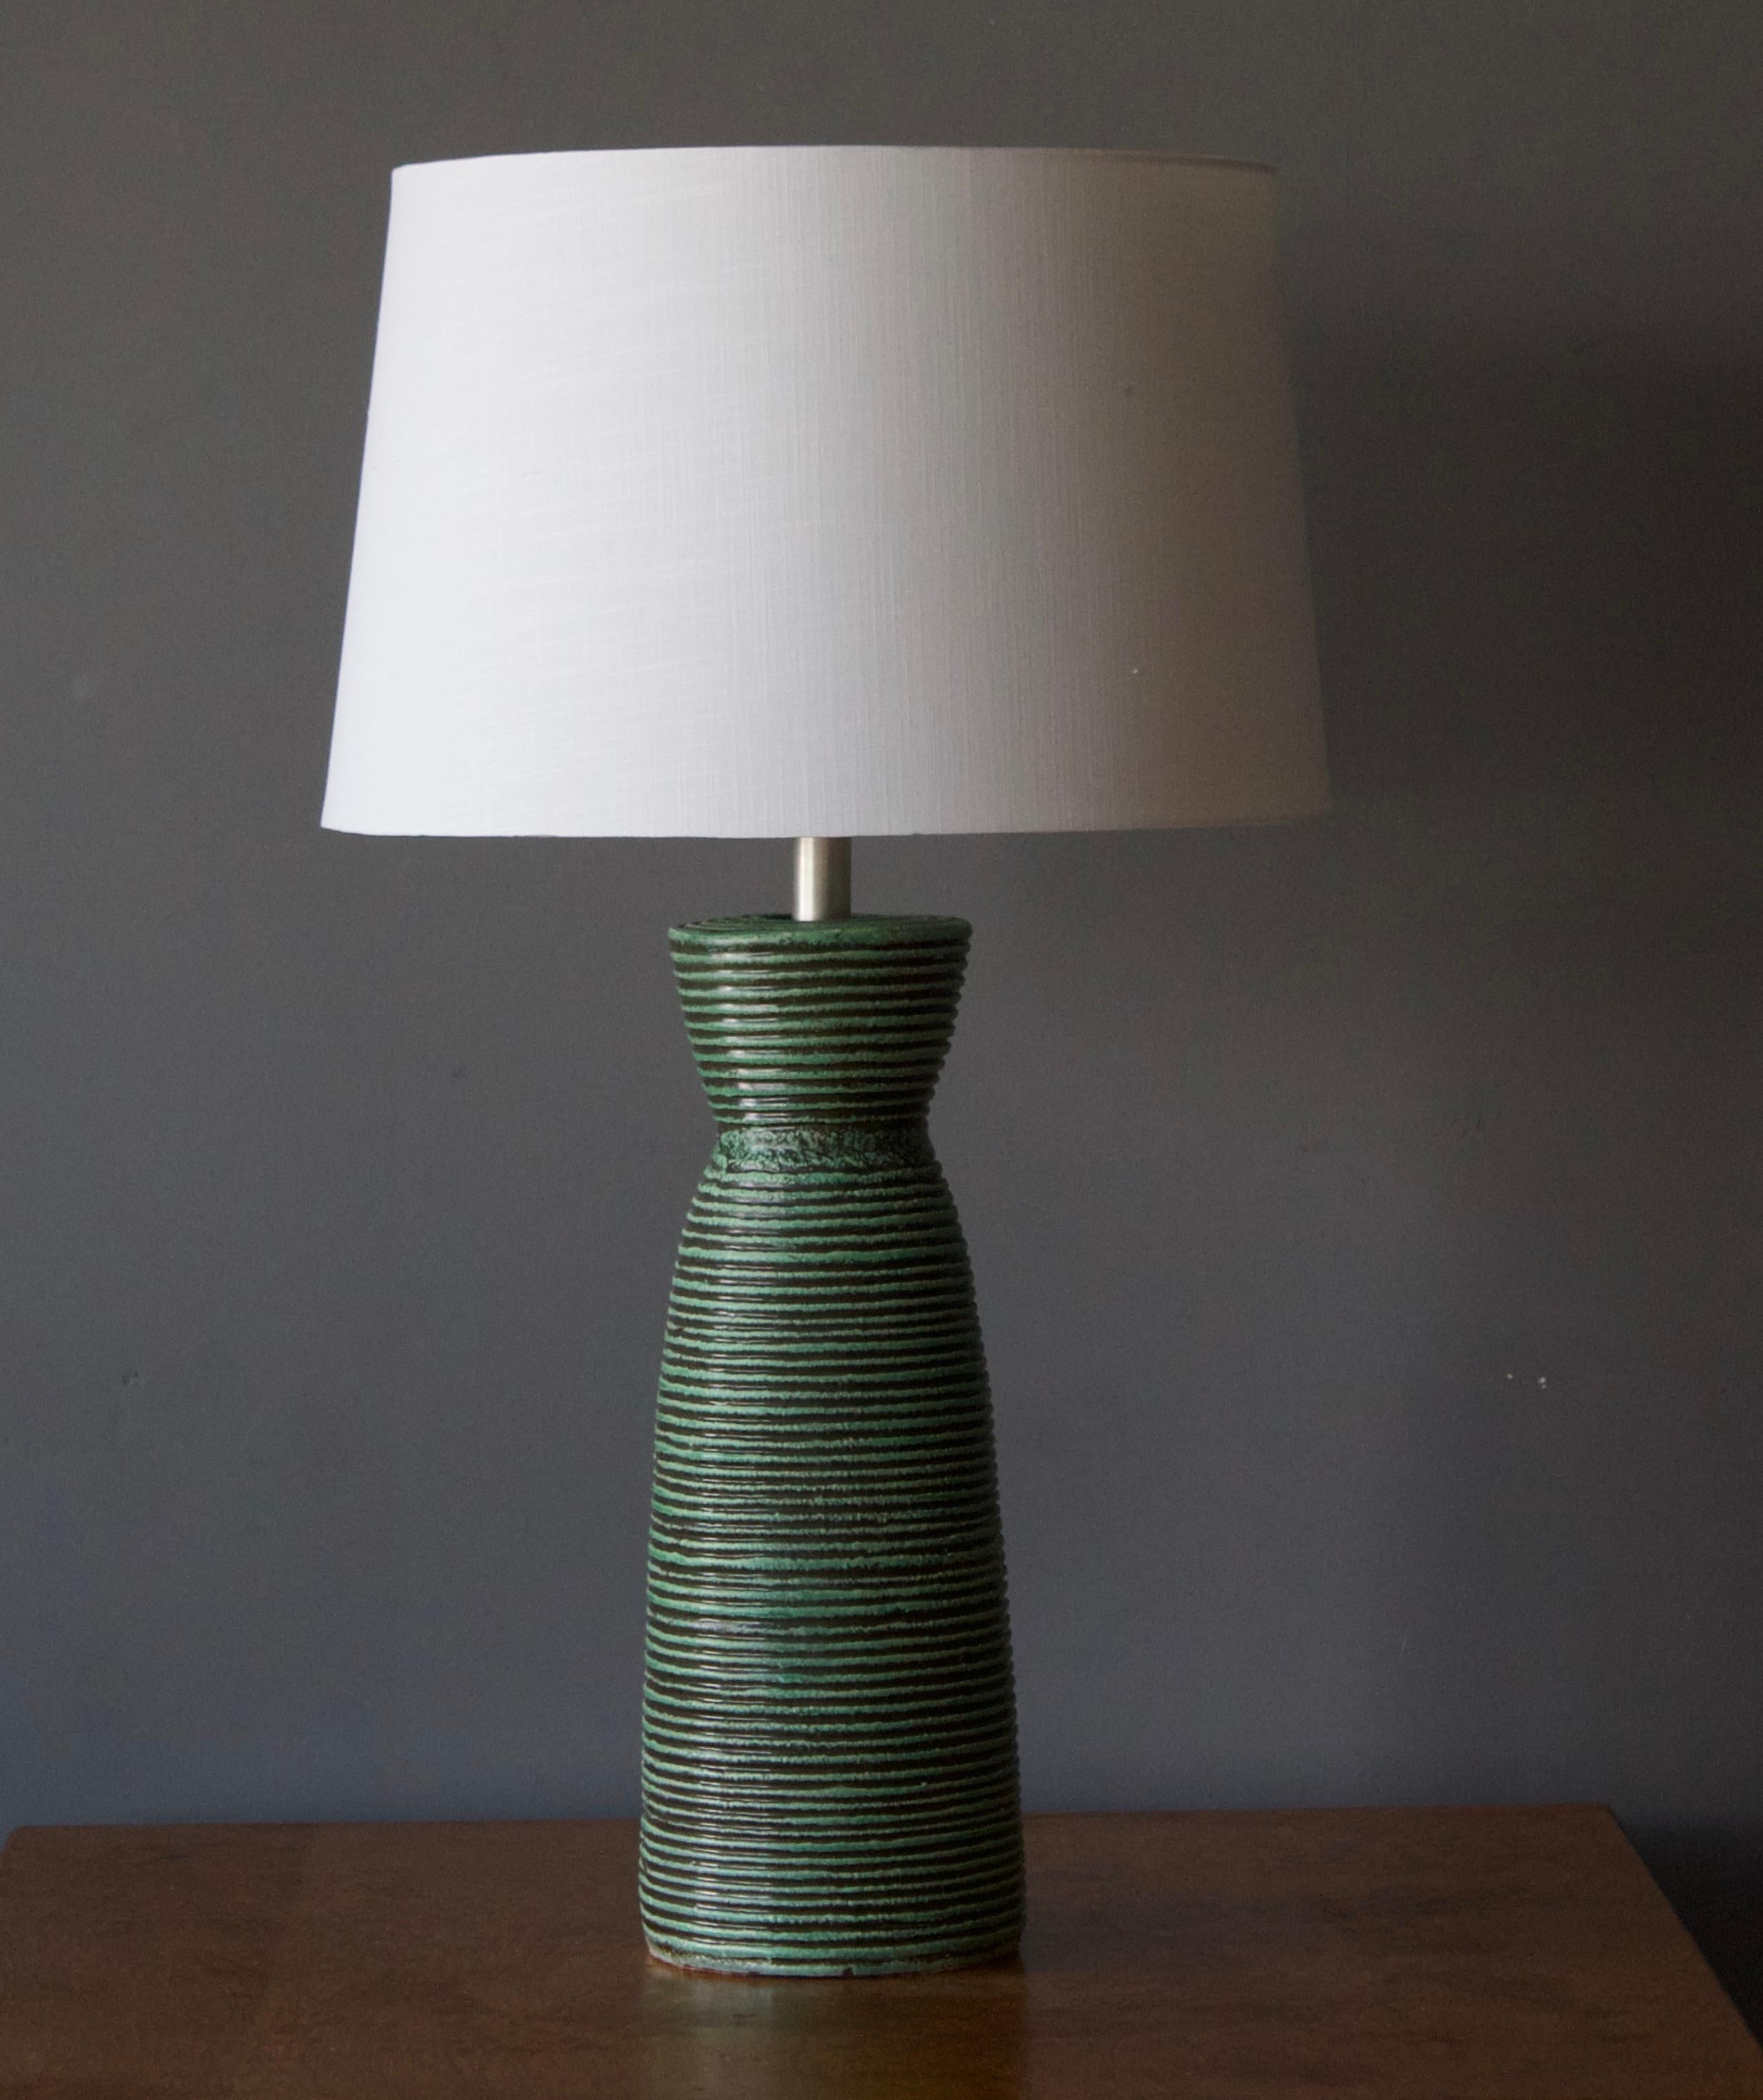 A pair of large table lamps, designed and produced by unknown American Designer, Artists studio, America, c. 1950s.

Features incised and green glazed / painted ceramic bases, metal stems. 

Other designers of the period include Claude Connover,